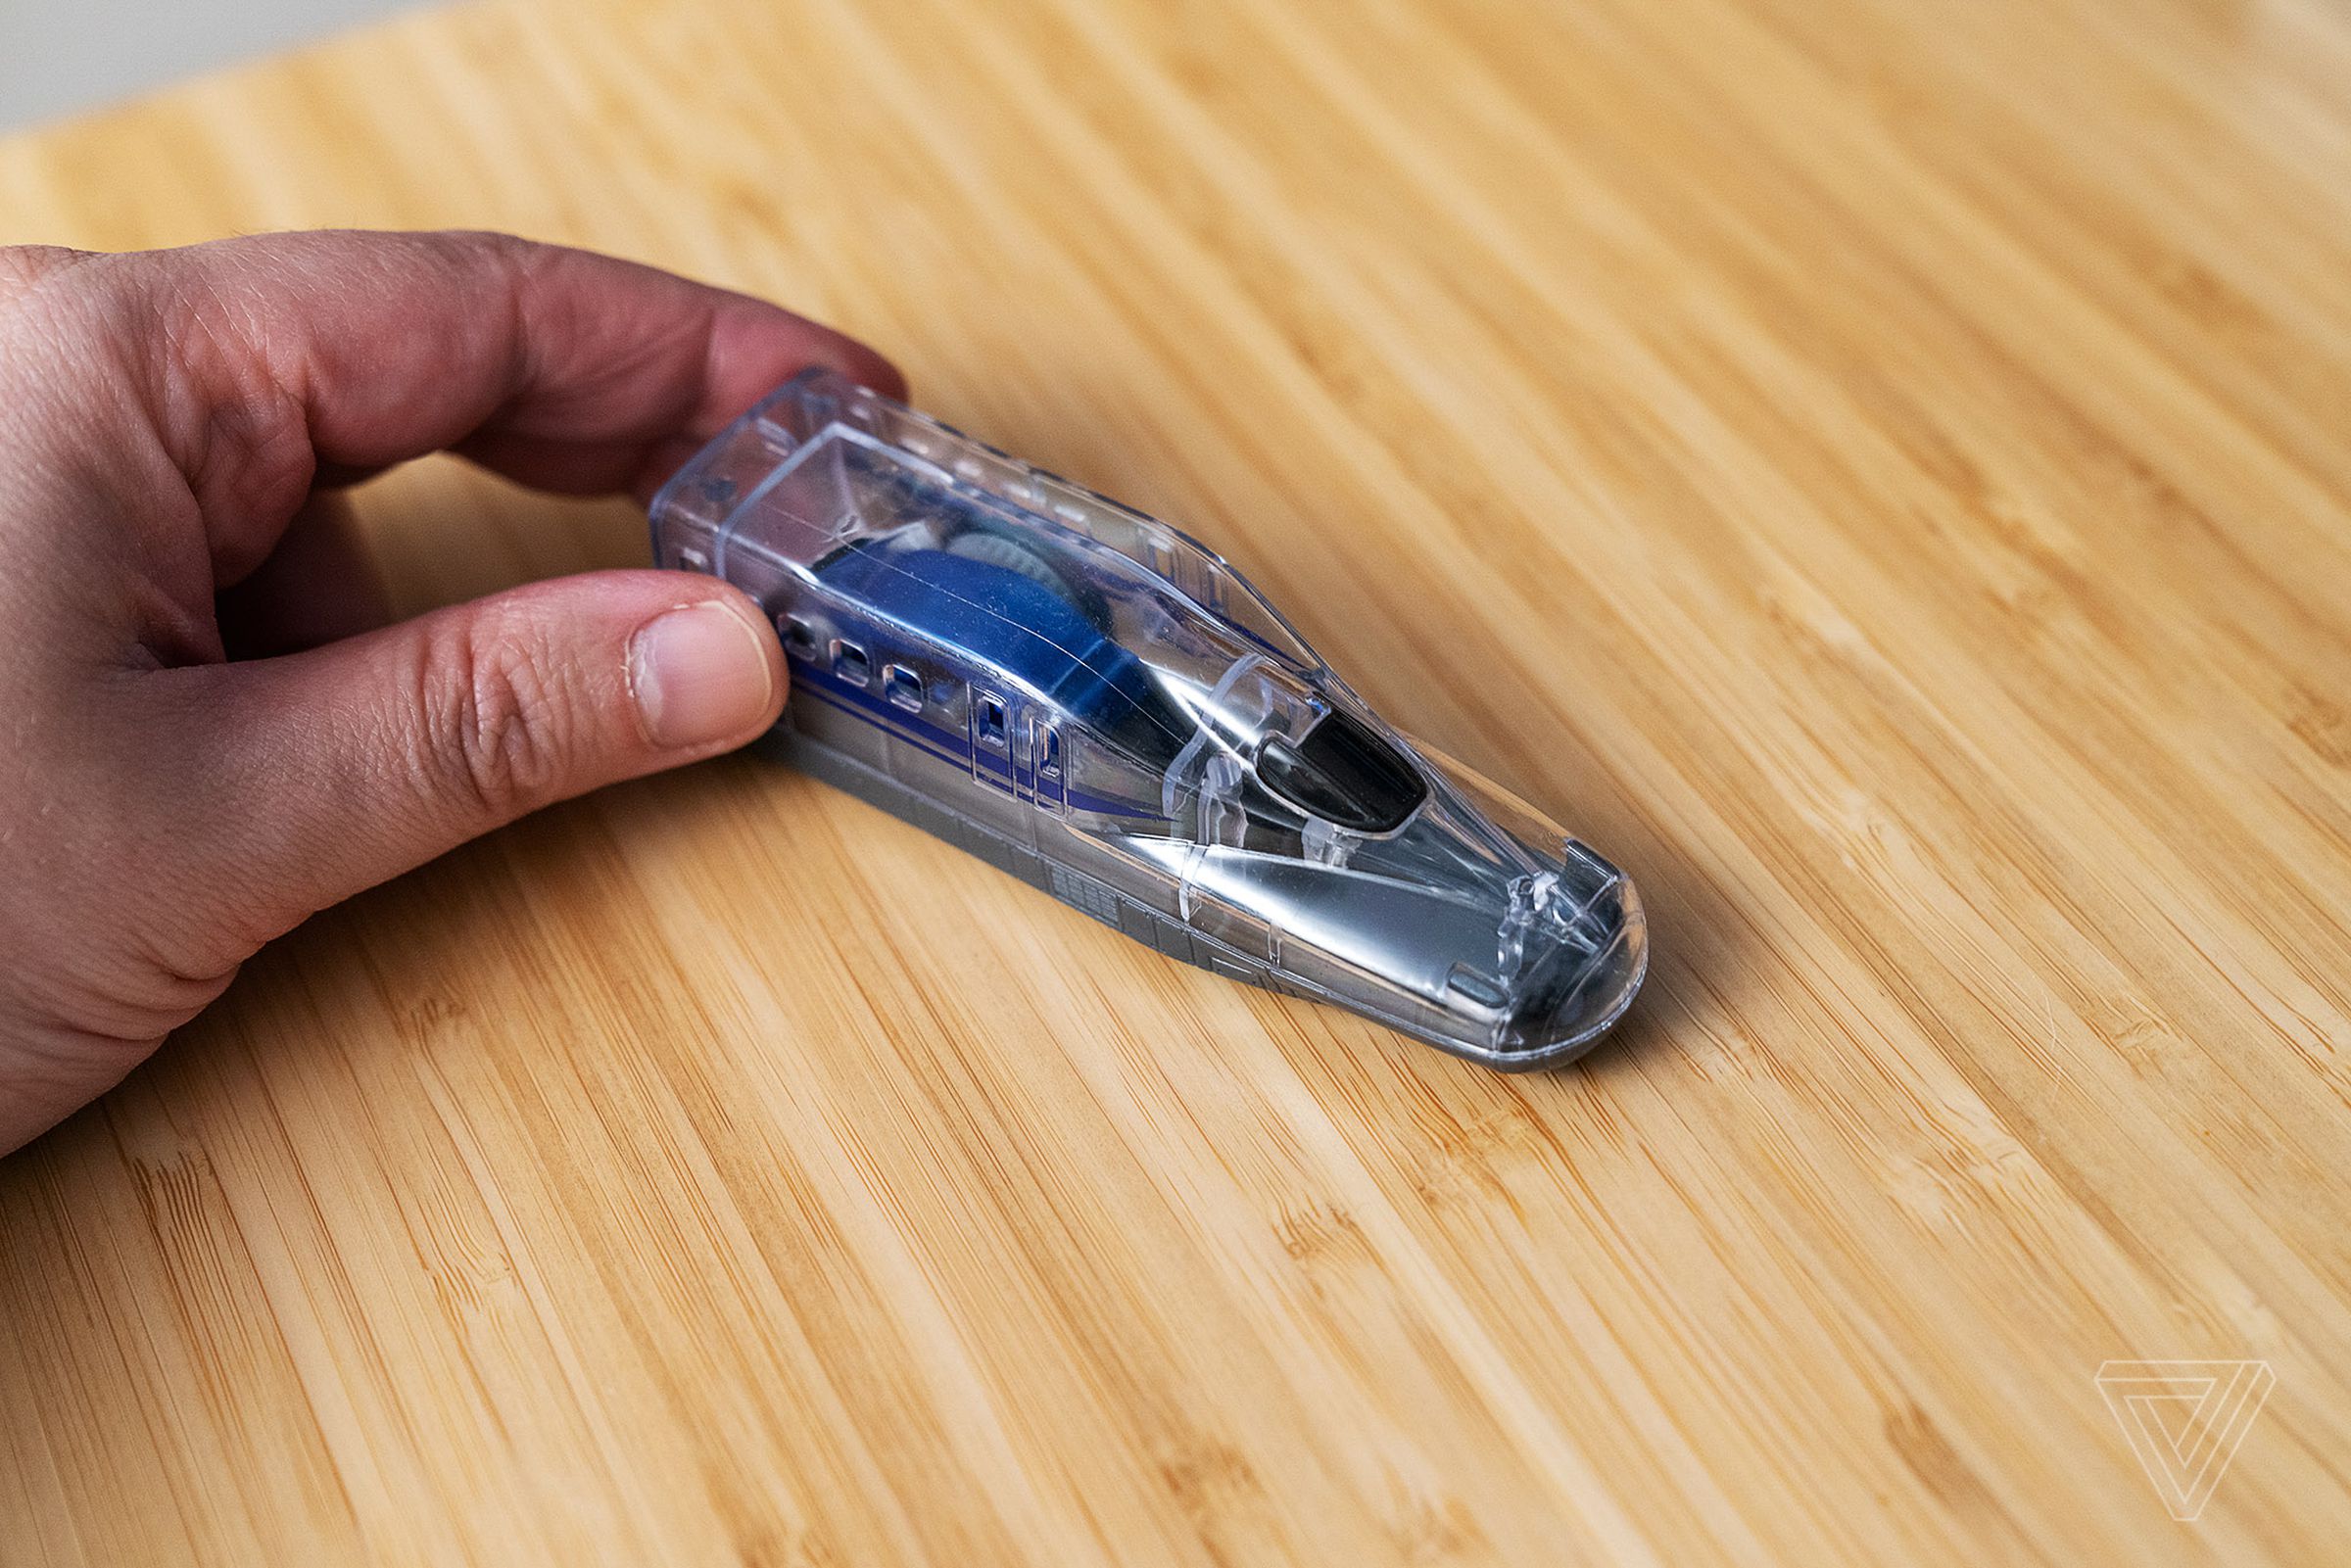 This desktop cleaner is modeled after a Japanese shinkansen bullet train.